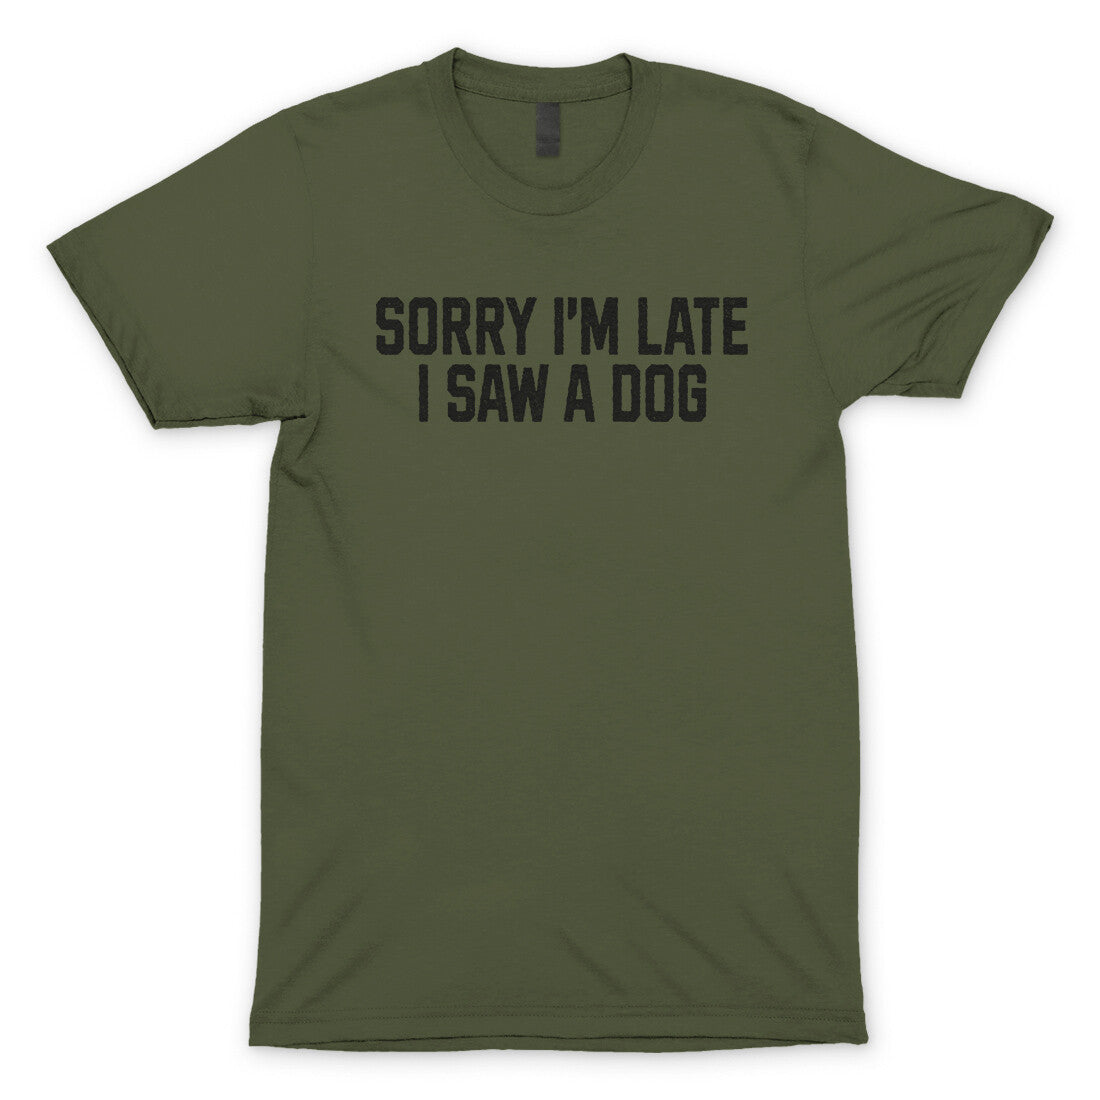 Sorry I'm Late I Saw a Dog in Military Green Color